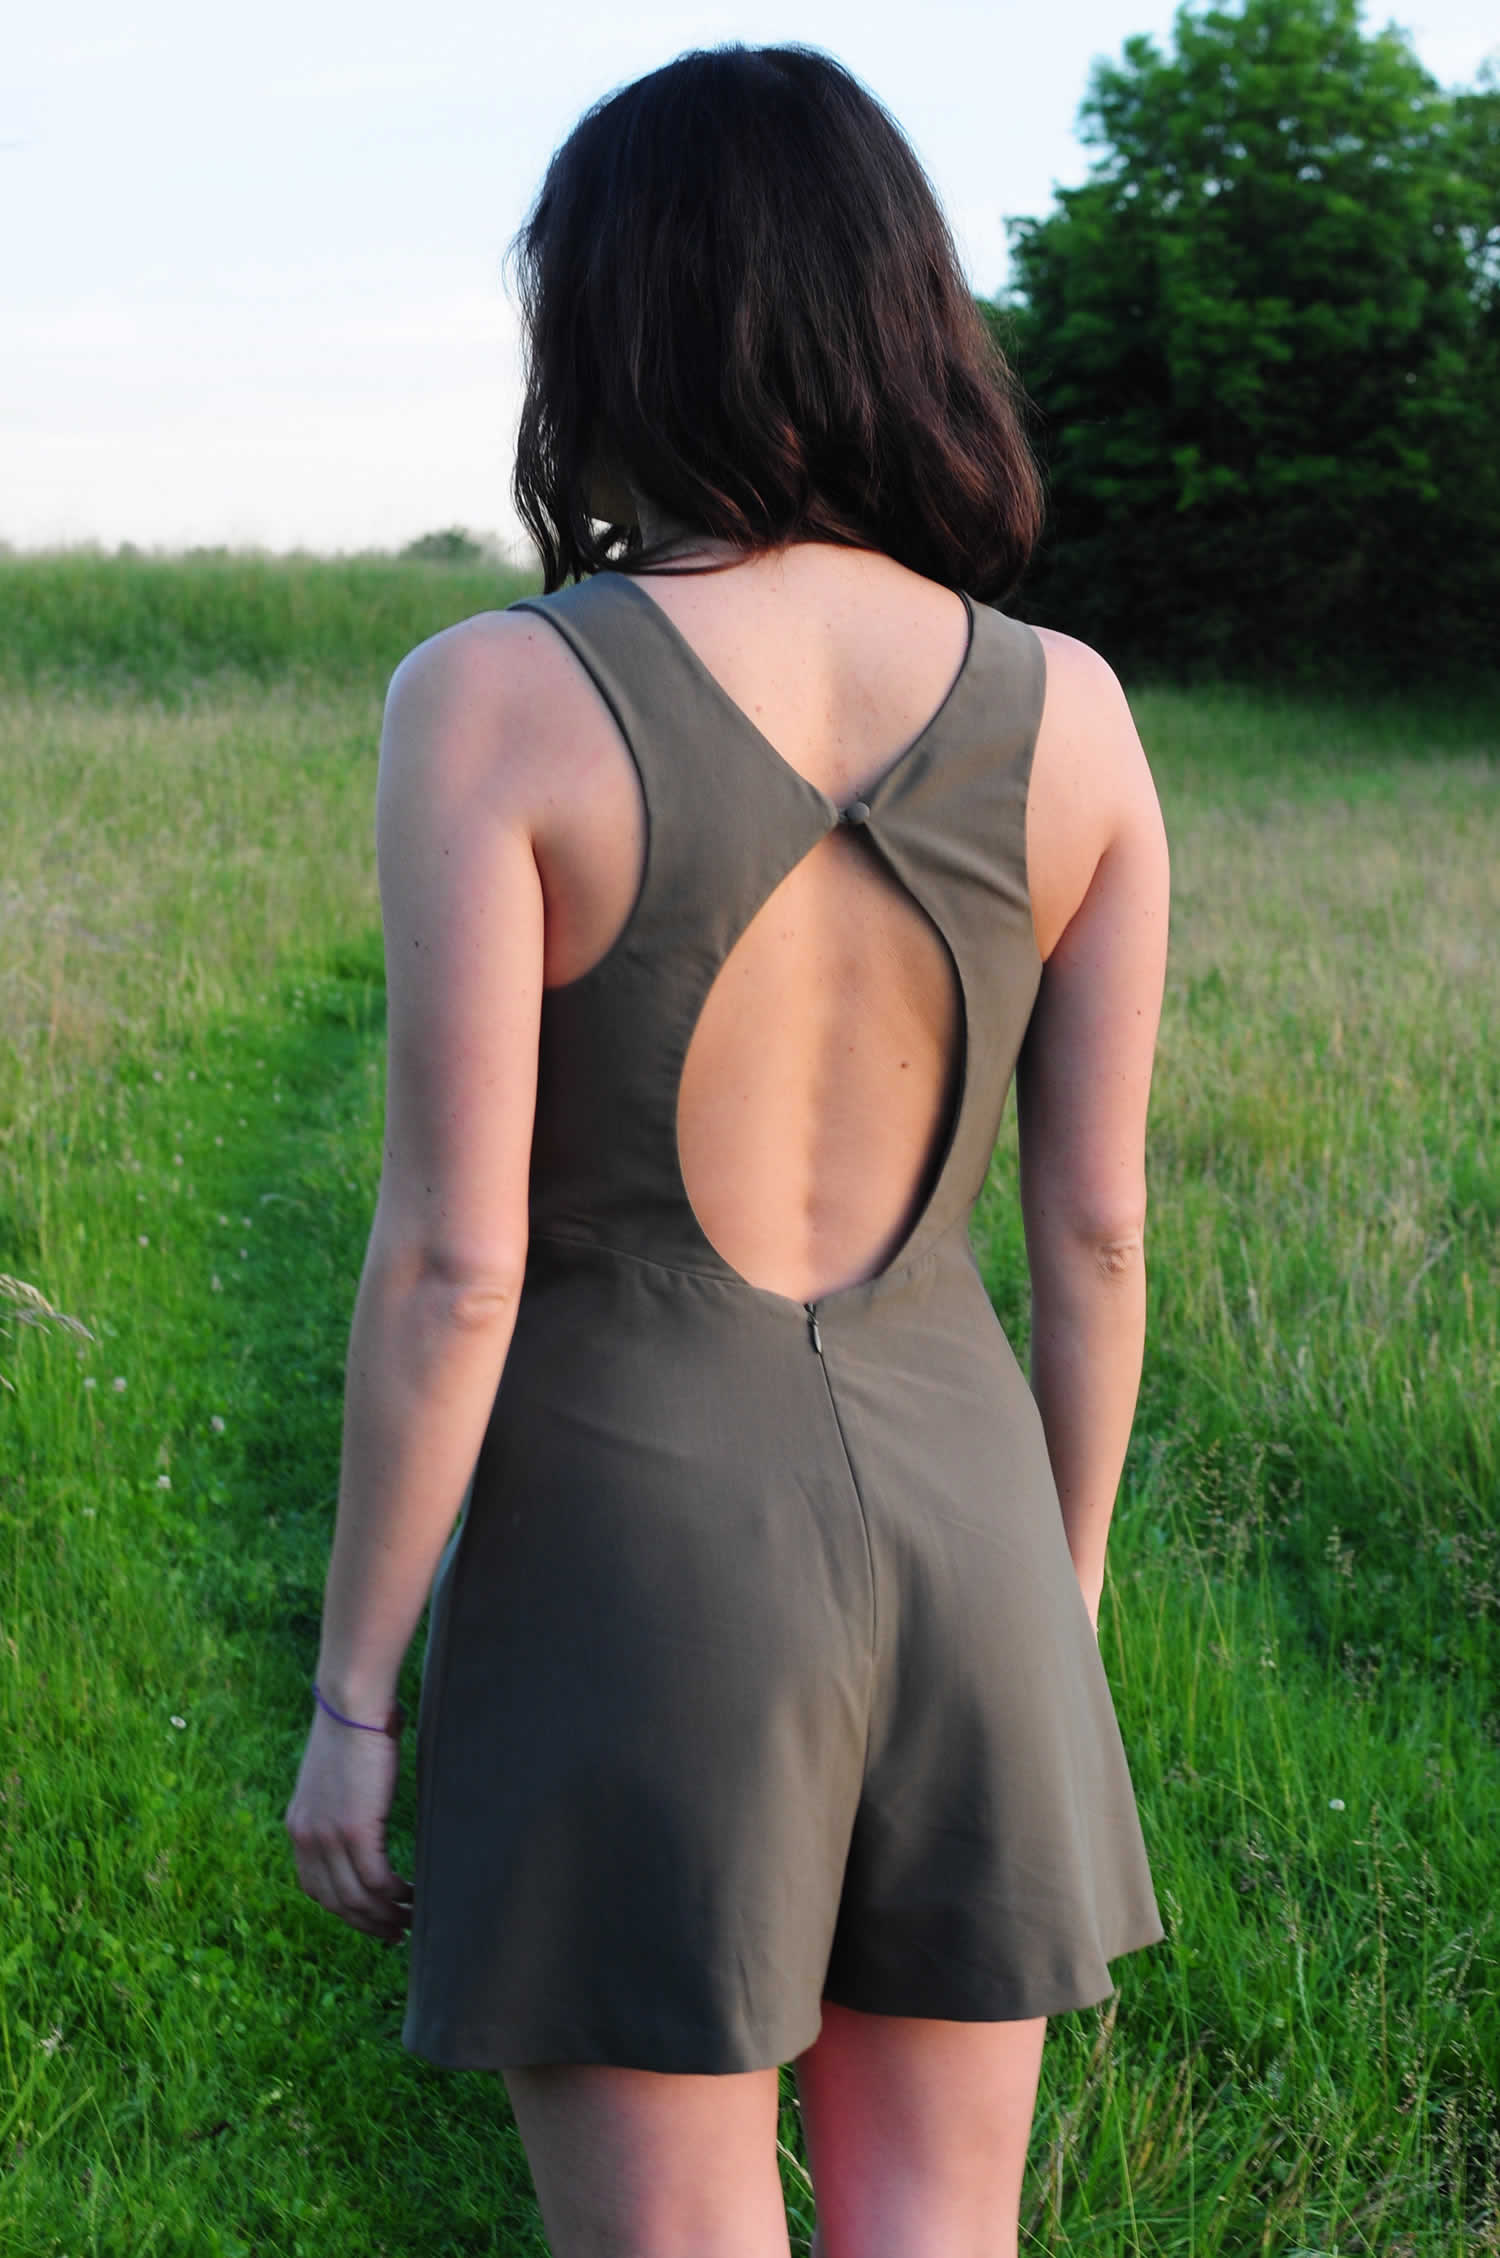 ladulsatina Sewing and DIY fashion blog: leather jacket and playsuit - army green playsuit with central draping - back detail